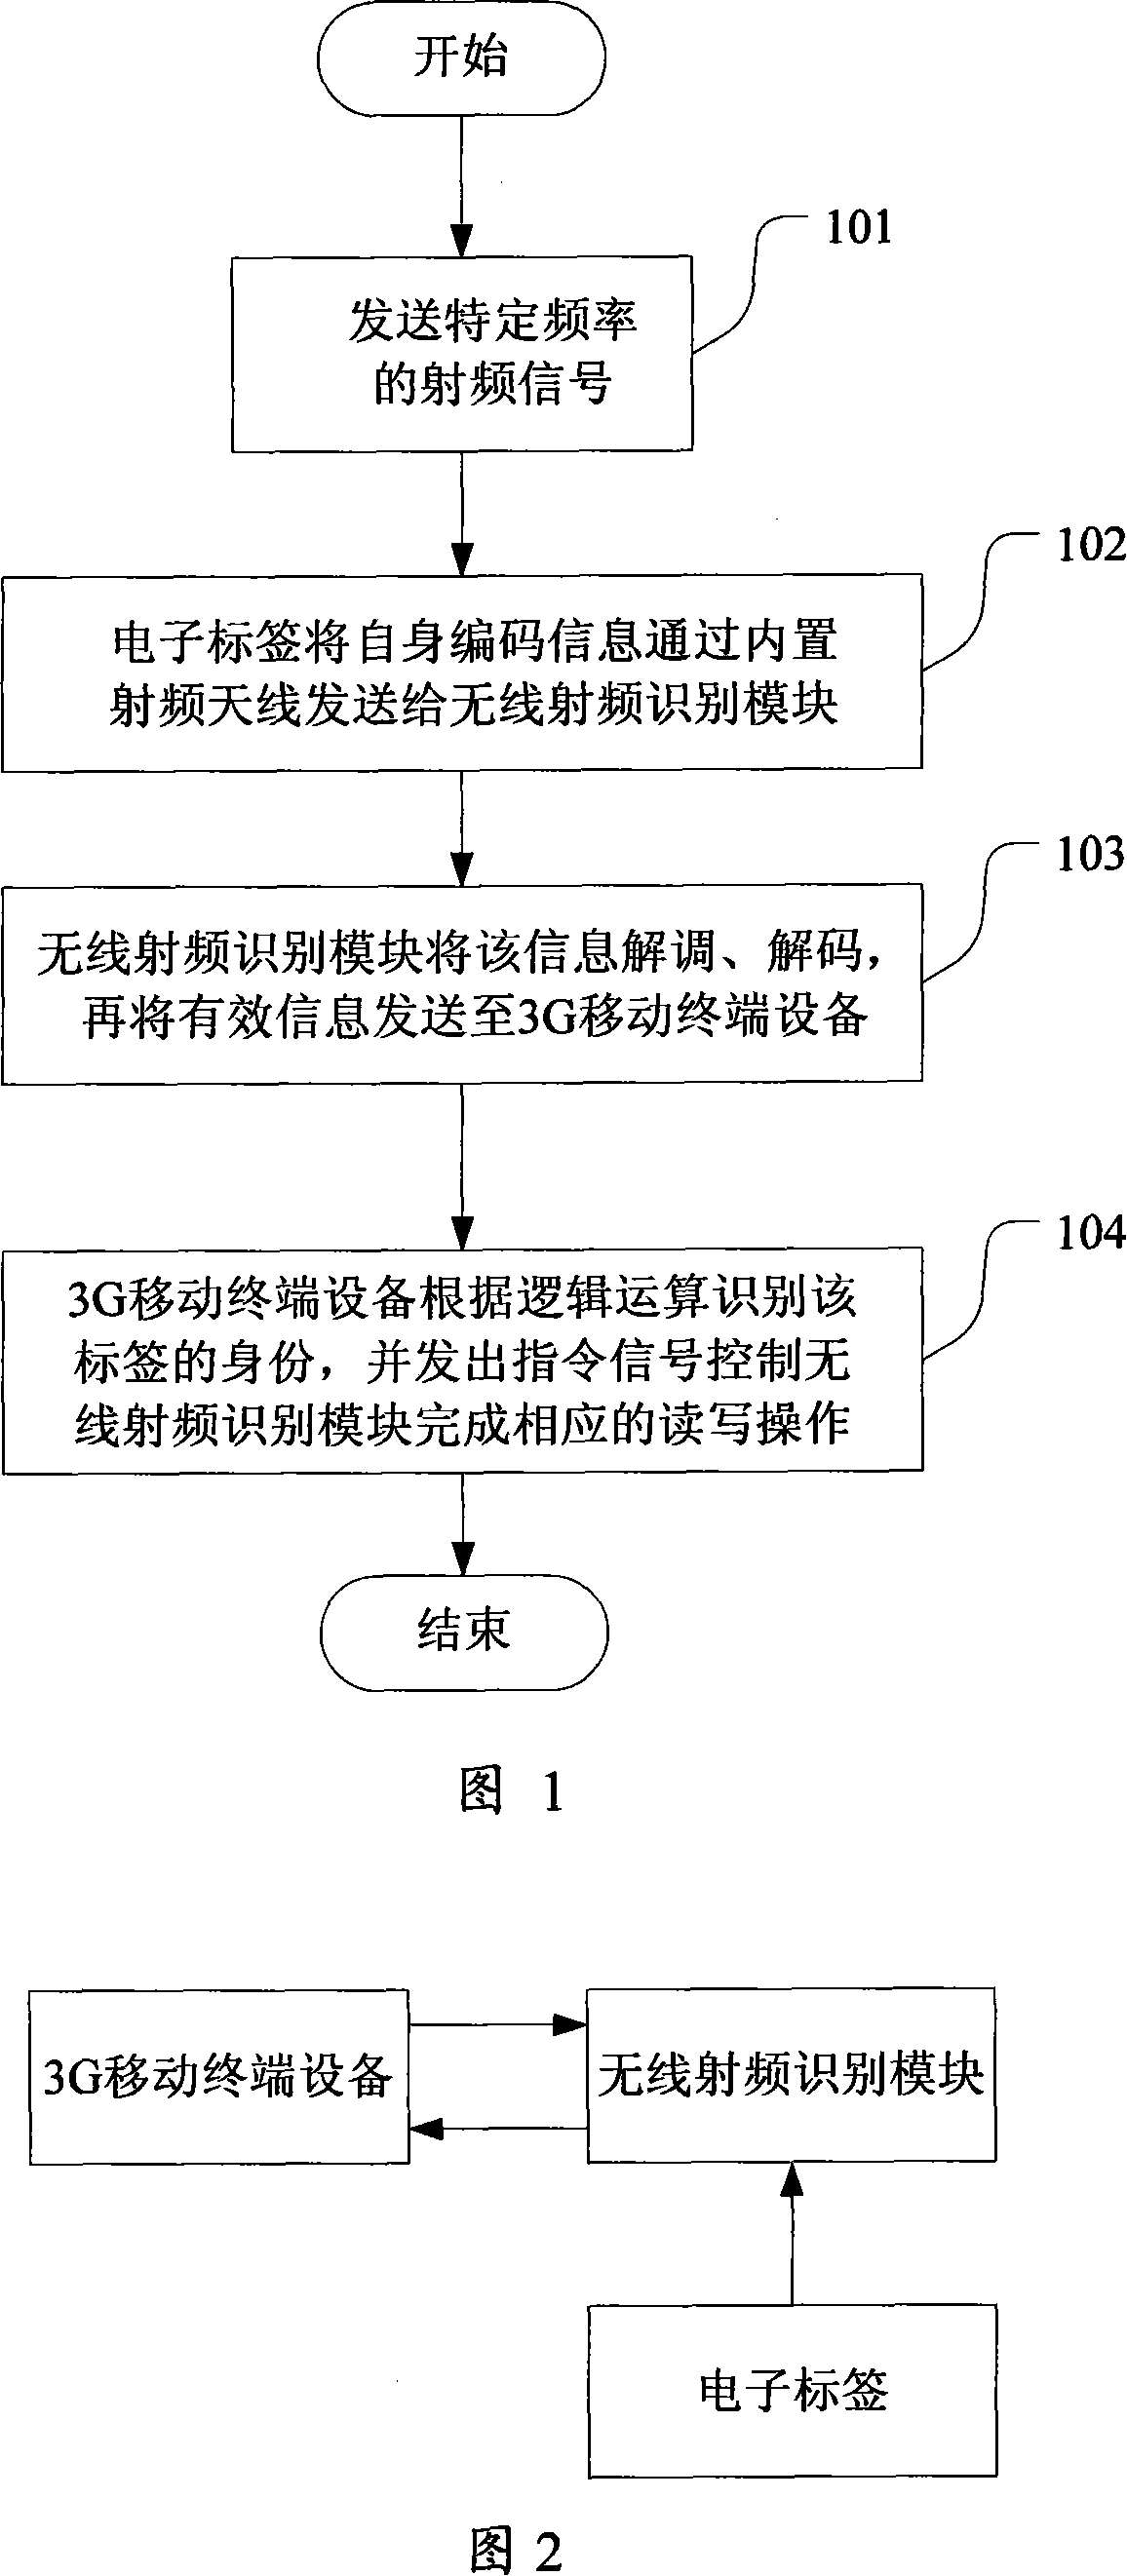 Electronic tag scanning method and system